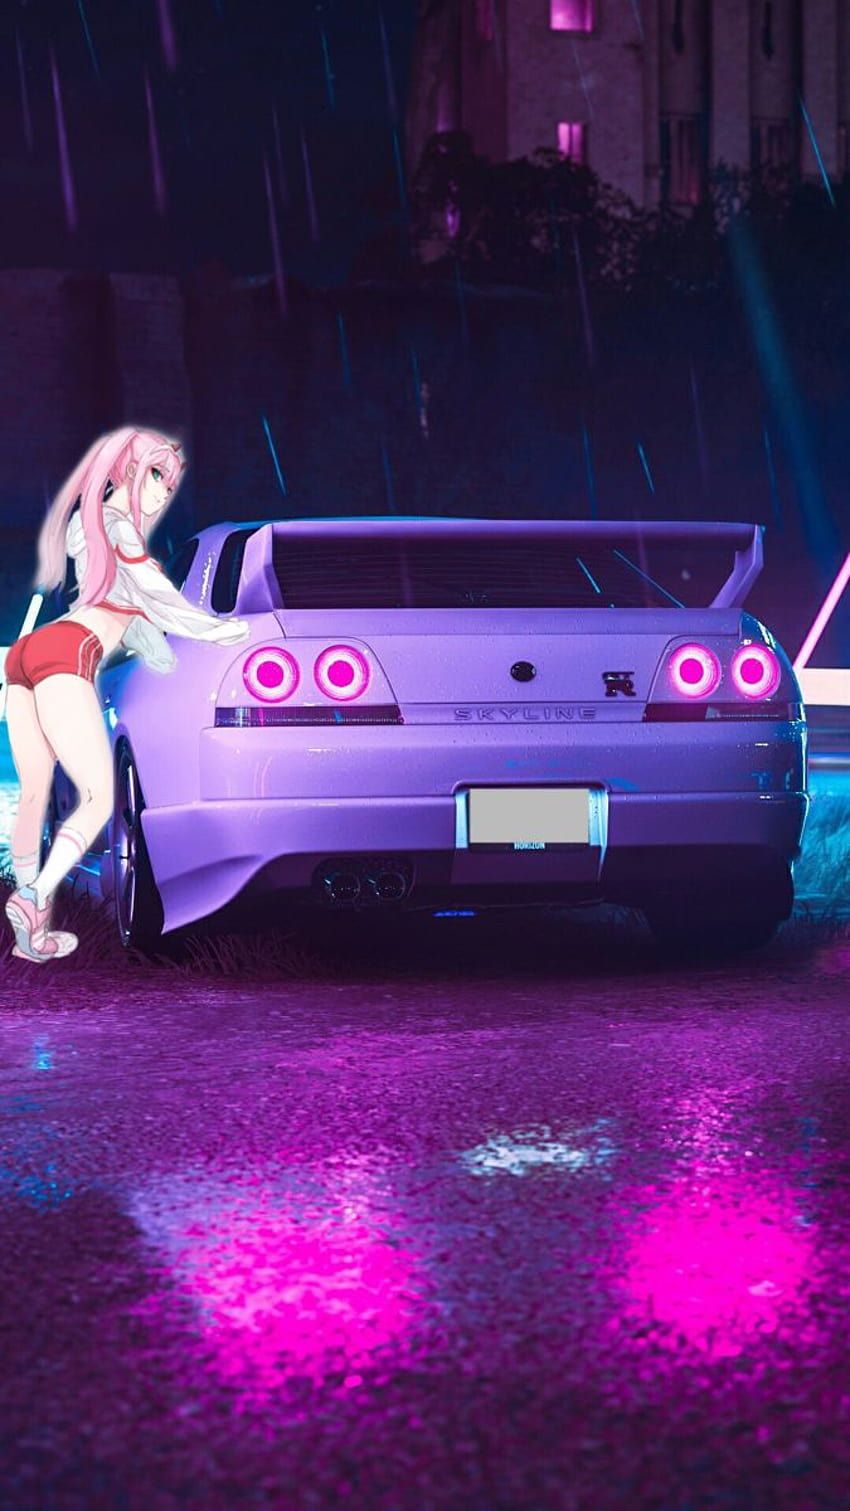 A girl is standing next to her car - Nissan Skyline